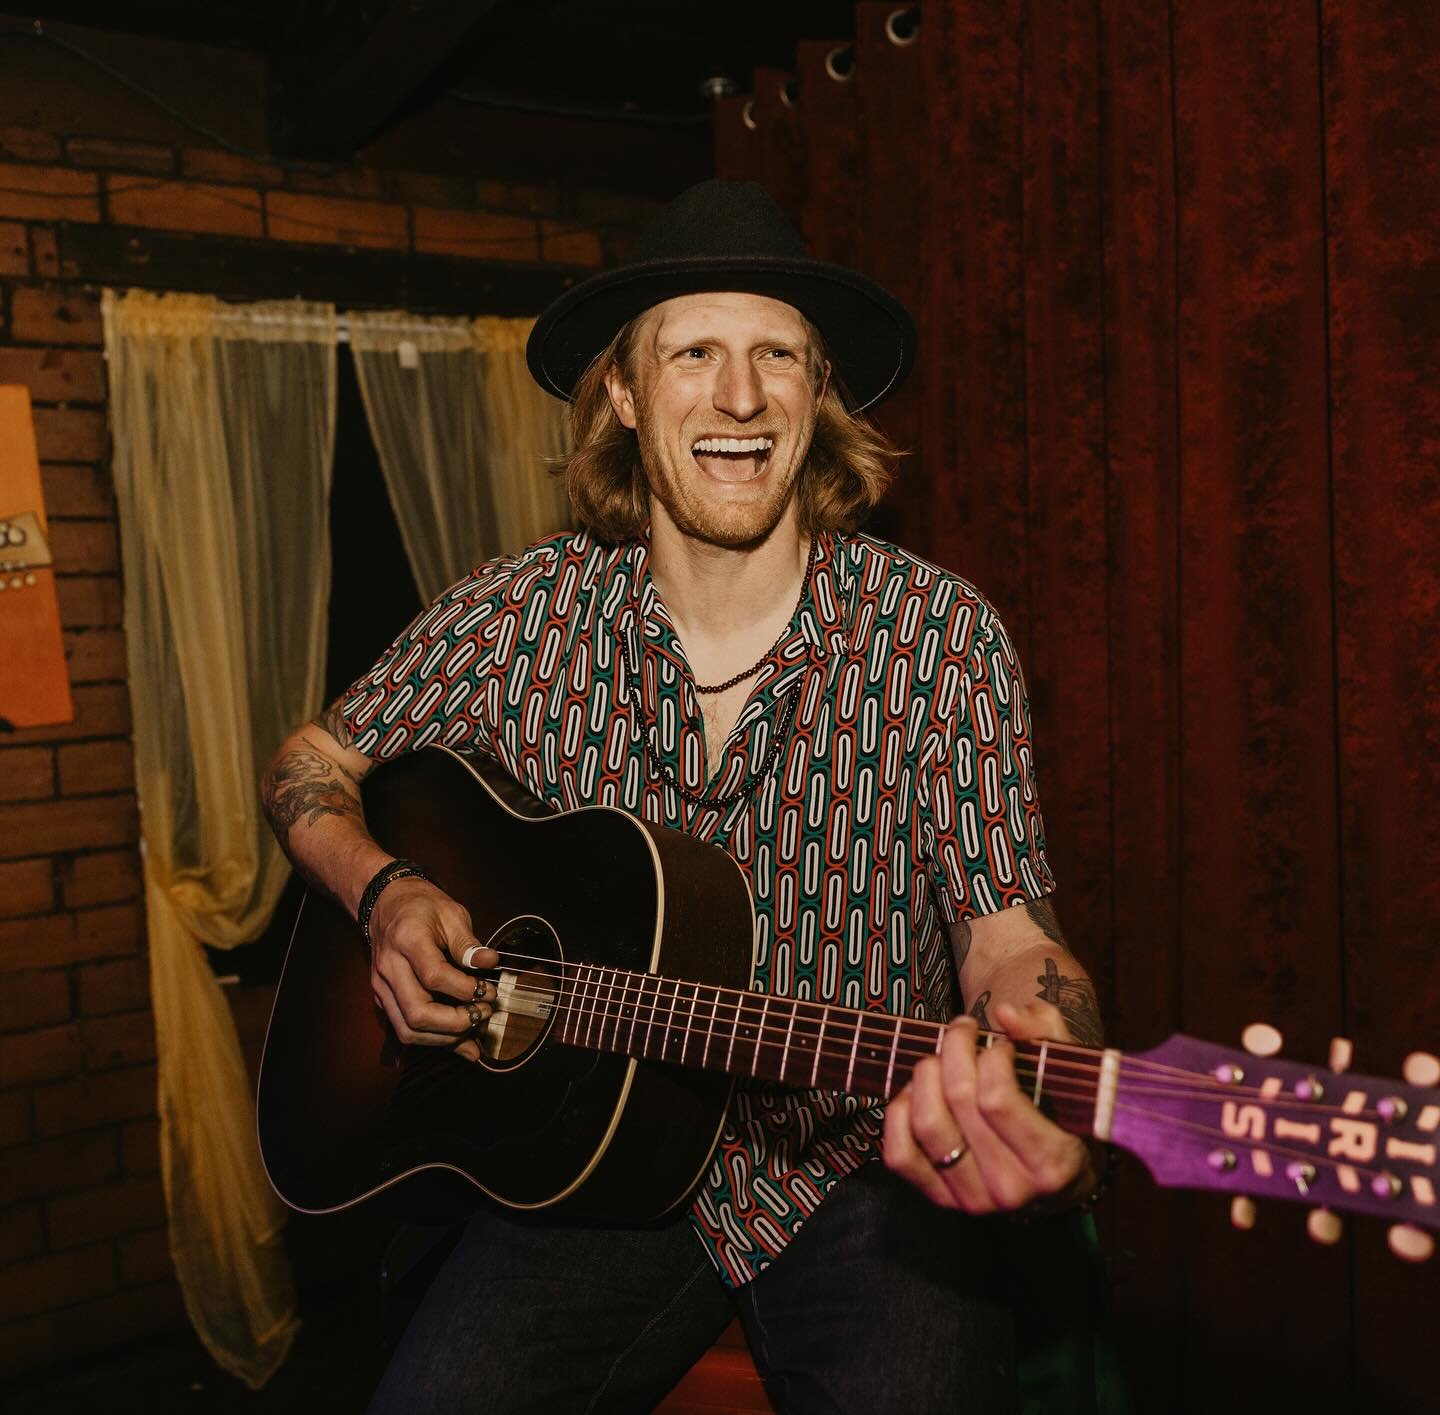 Catch @tompevear pickin and grinnin tonight at 6pm! If you ain&rsquo;t seen him, now&rsquo;s your chance!